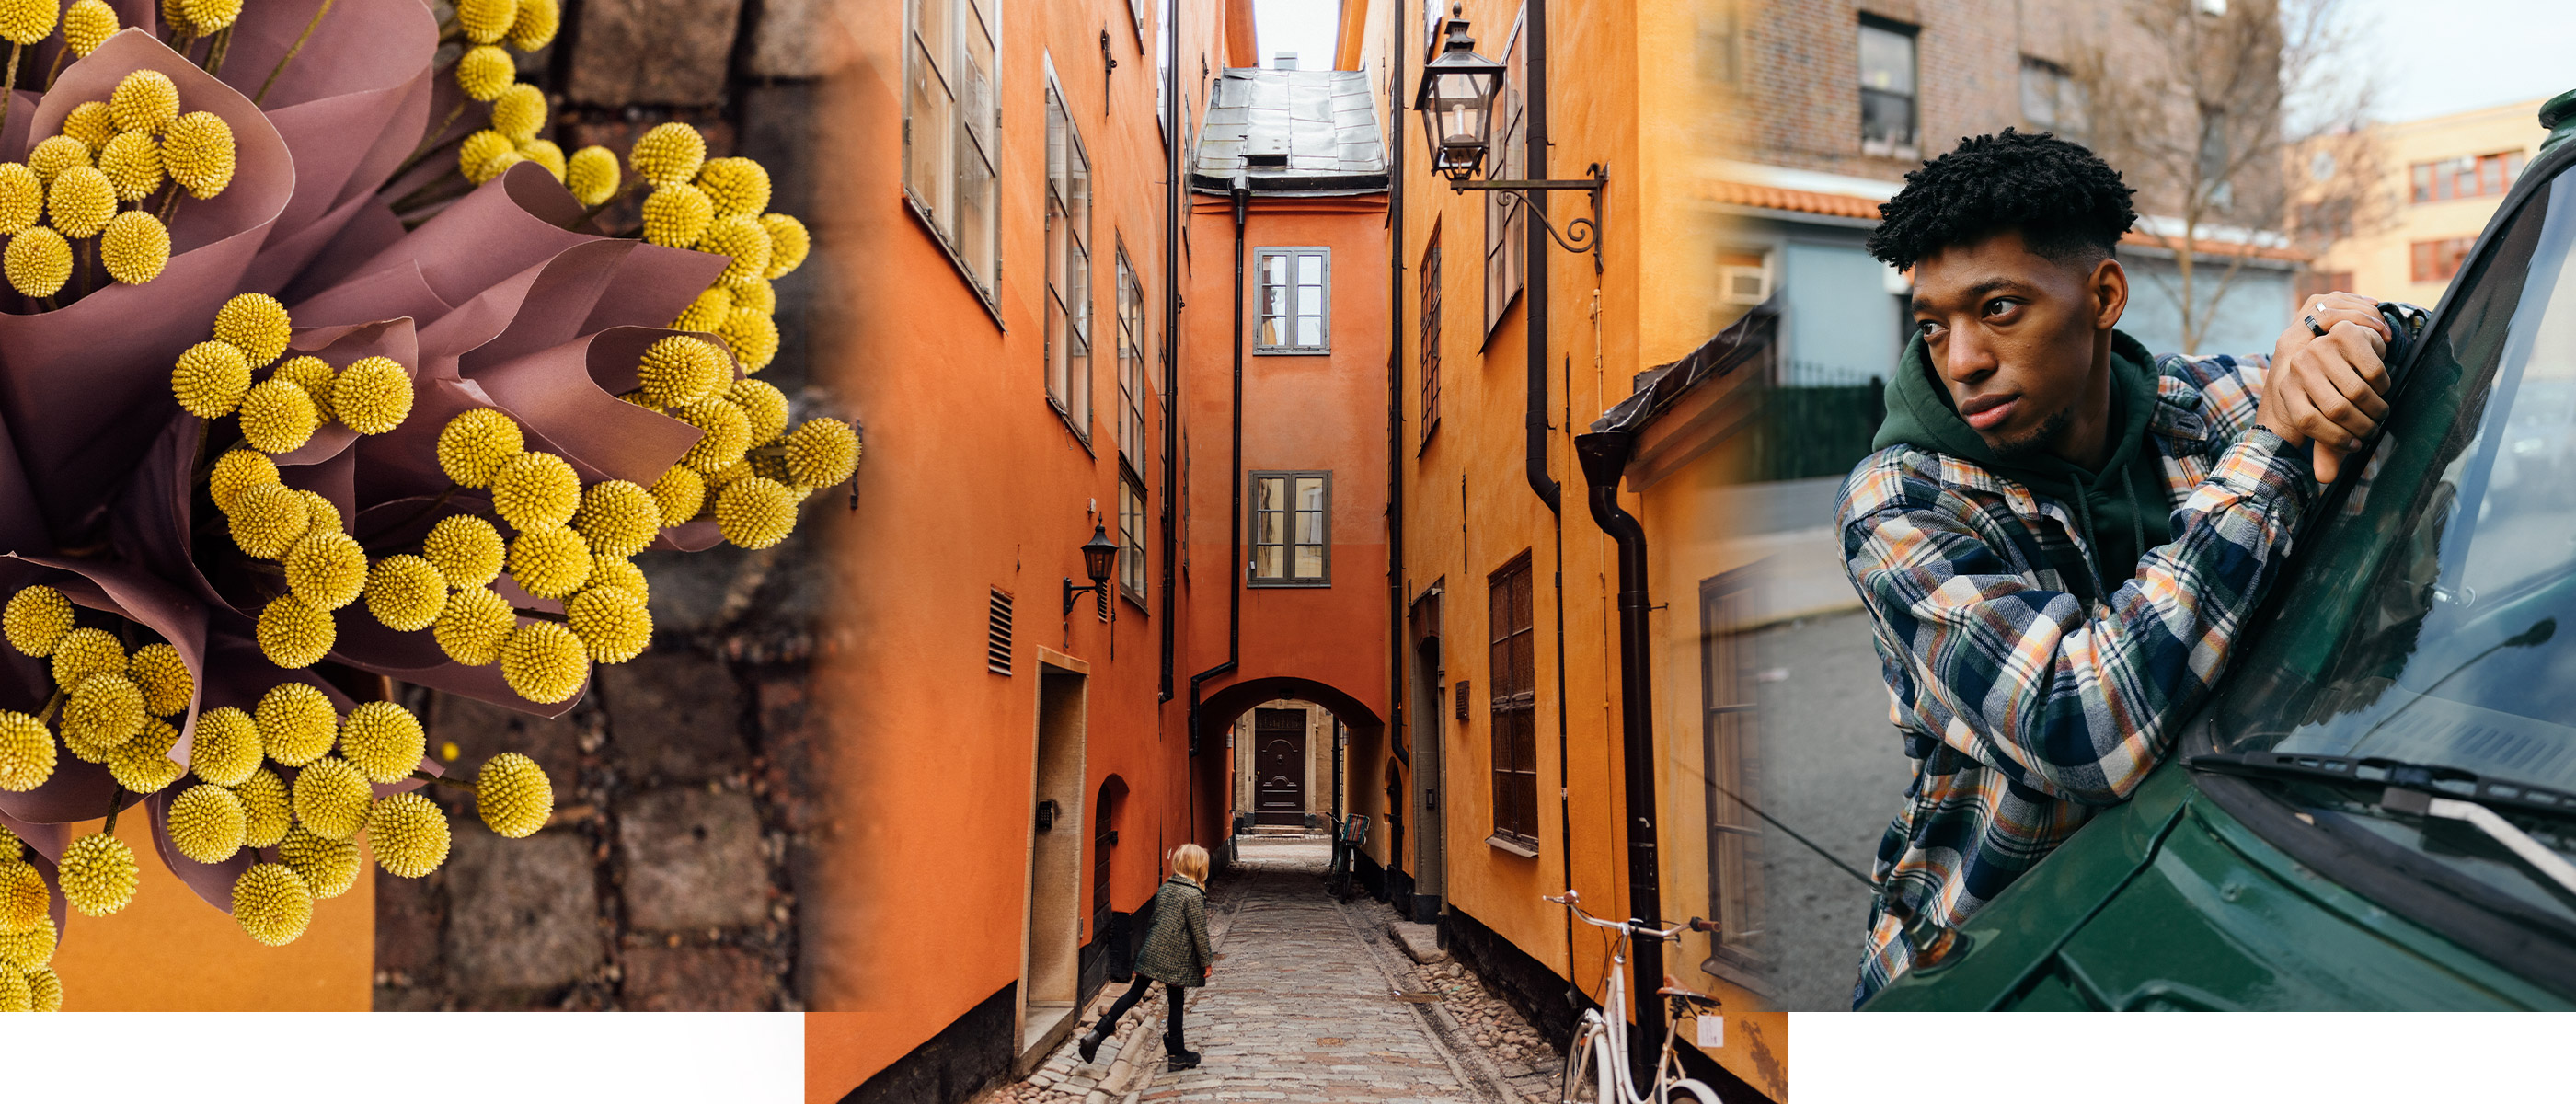 Collage of images taken with the NIKKOR Z 28mm f/2.8 lens including a portrait and an alleyway and colorful yellow balls